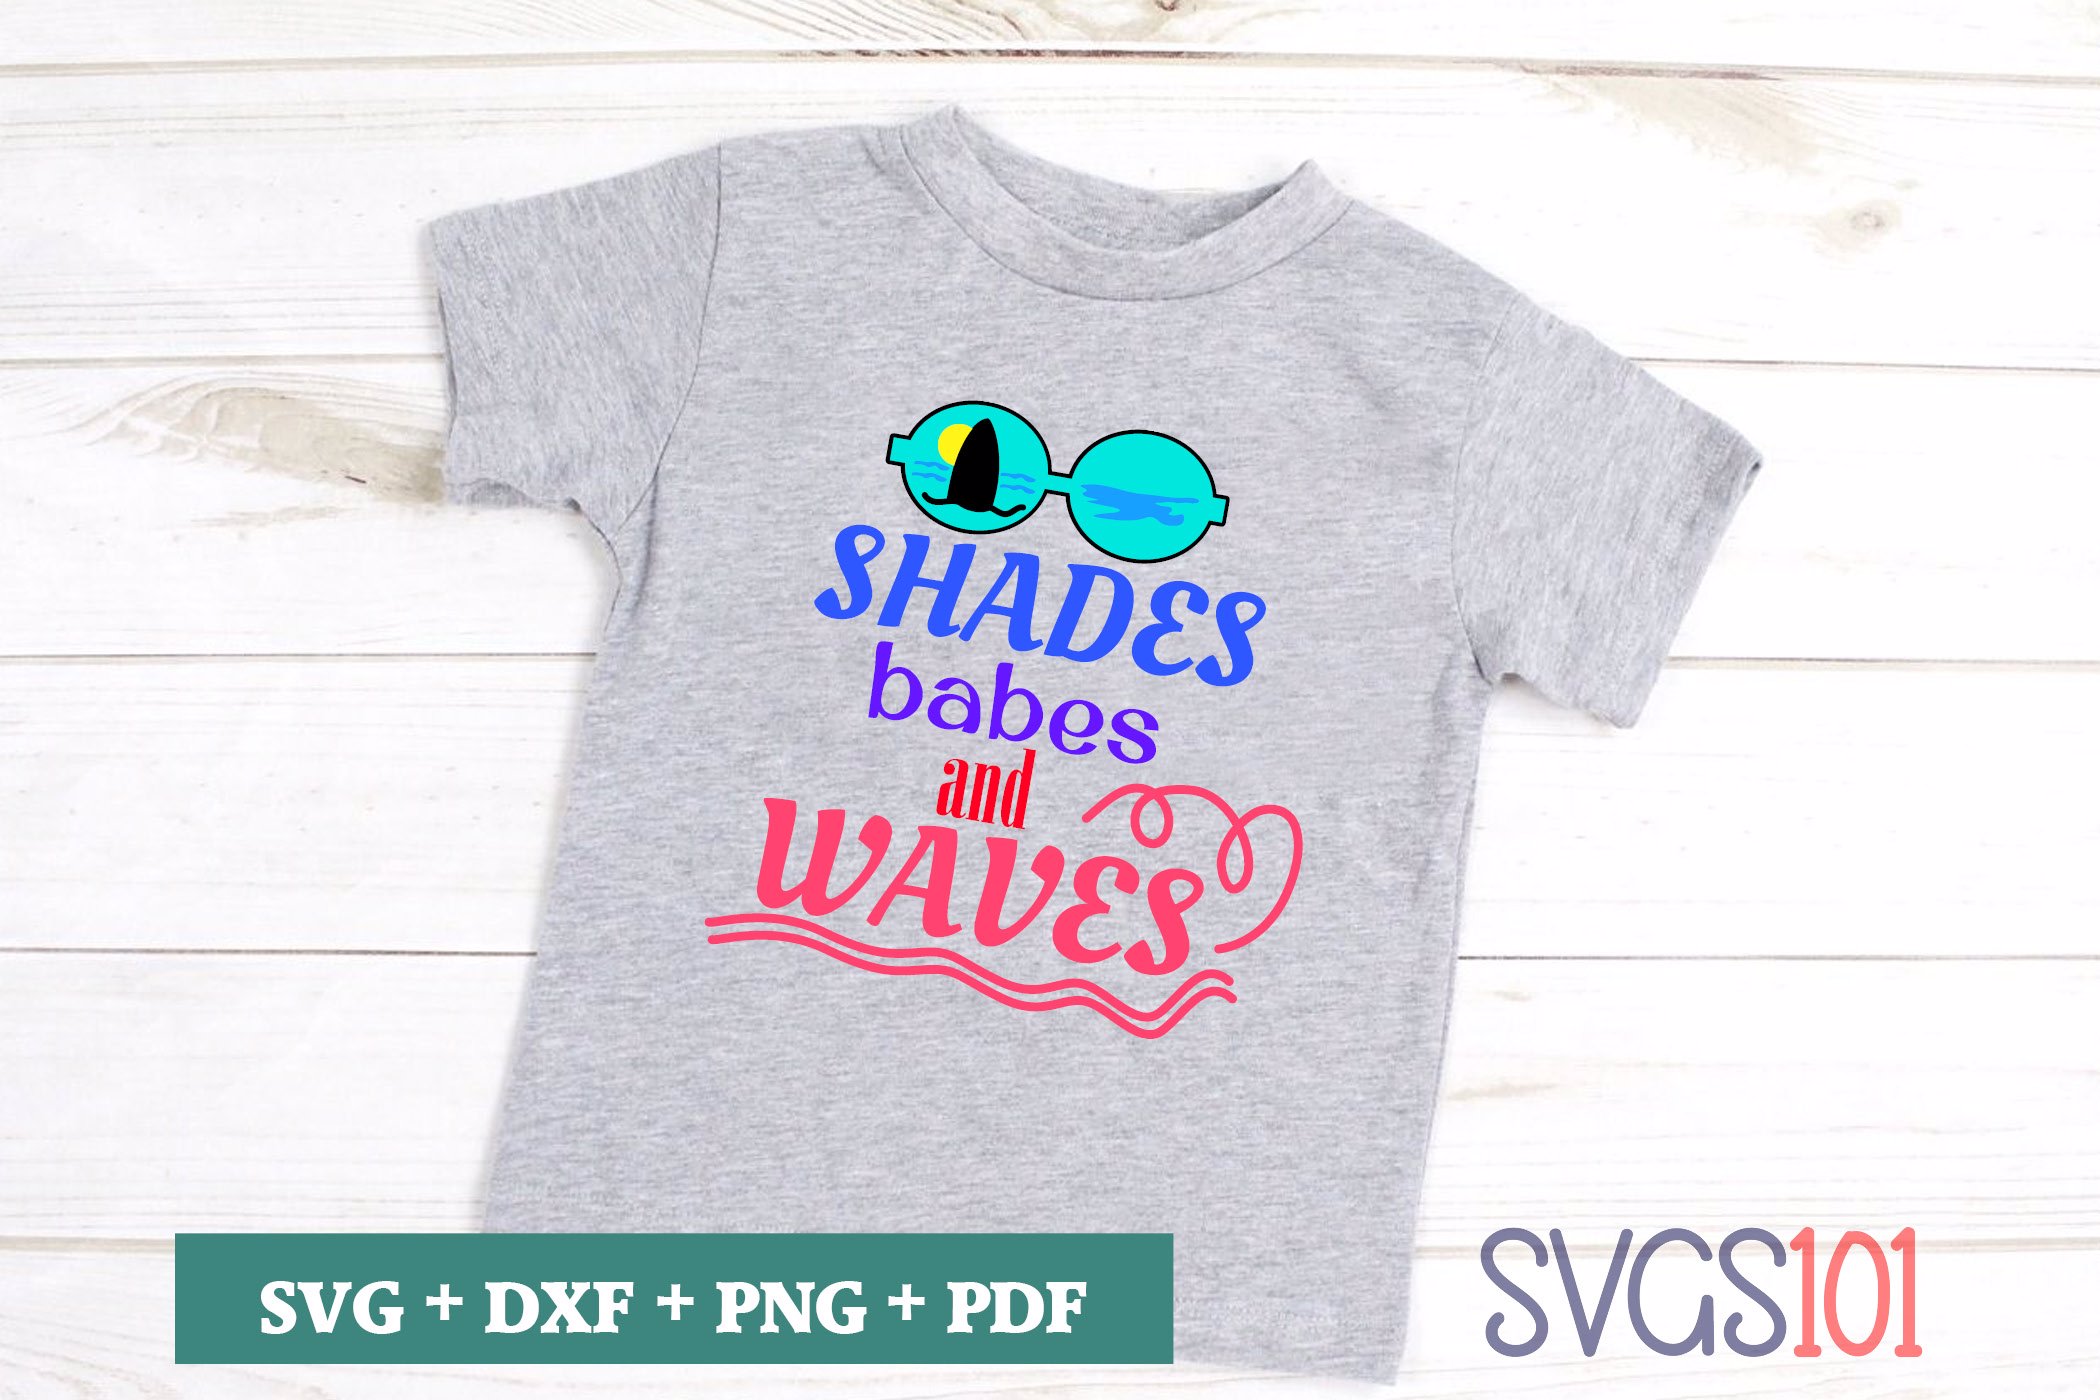 Shades Babes And Waves SVG Cuttable file - DXF, EPS, PNG, PDF | SVG ...